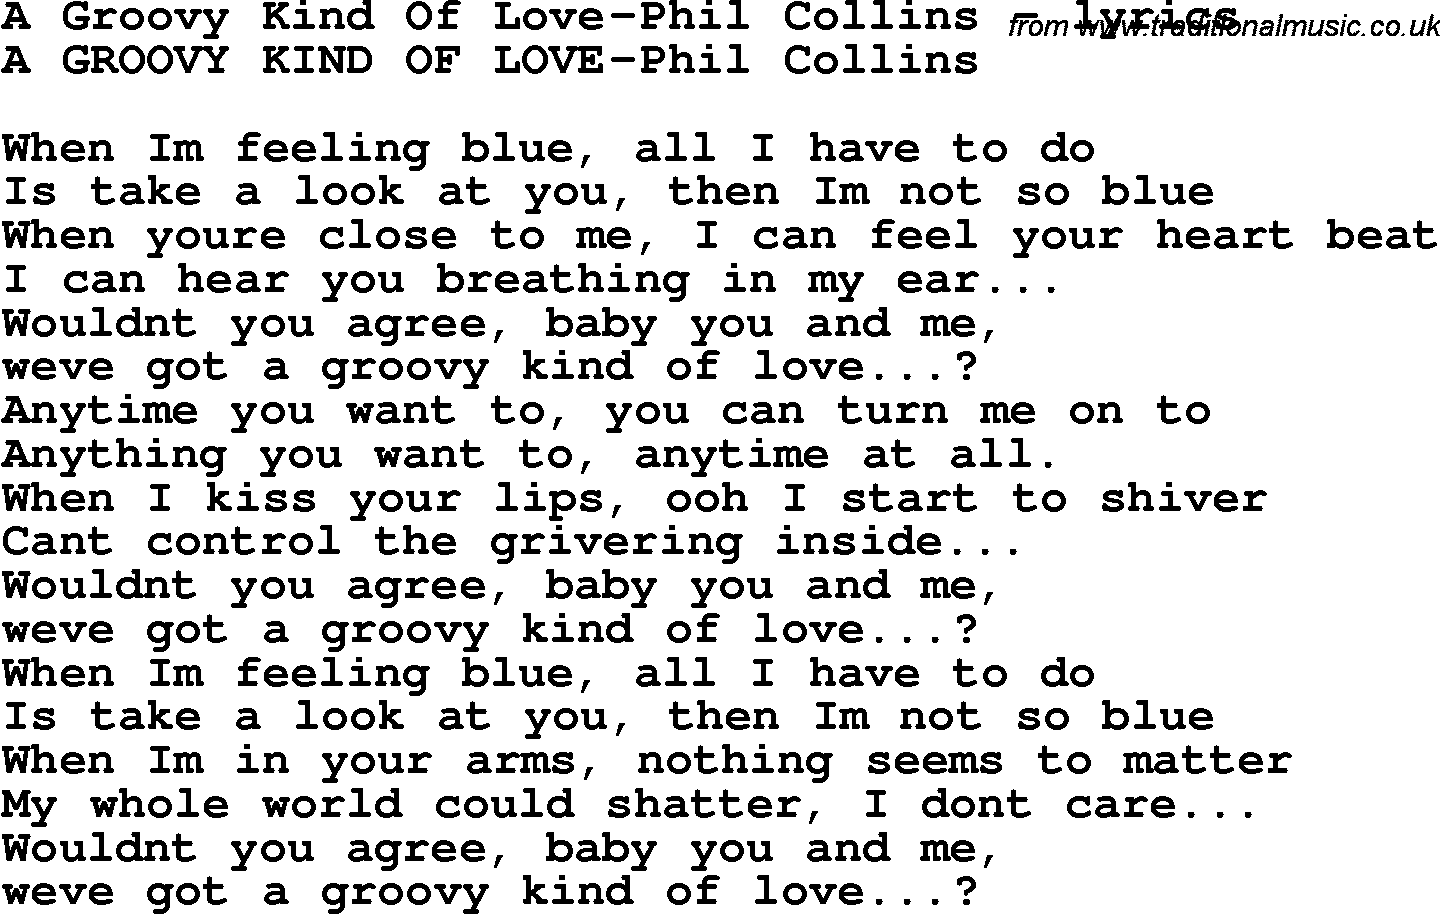 Love Song Lyrics for: A Groovy Kind Of Love-Phil Collins